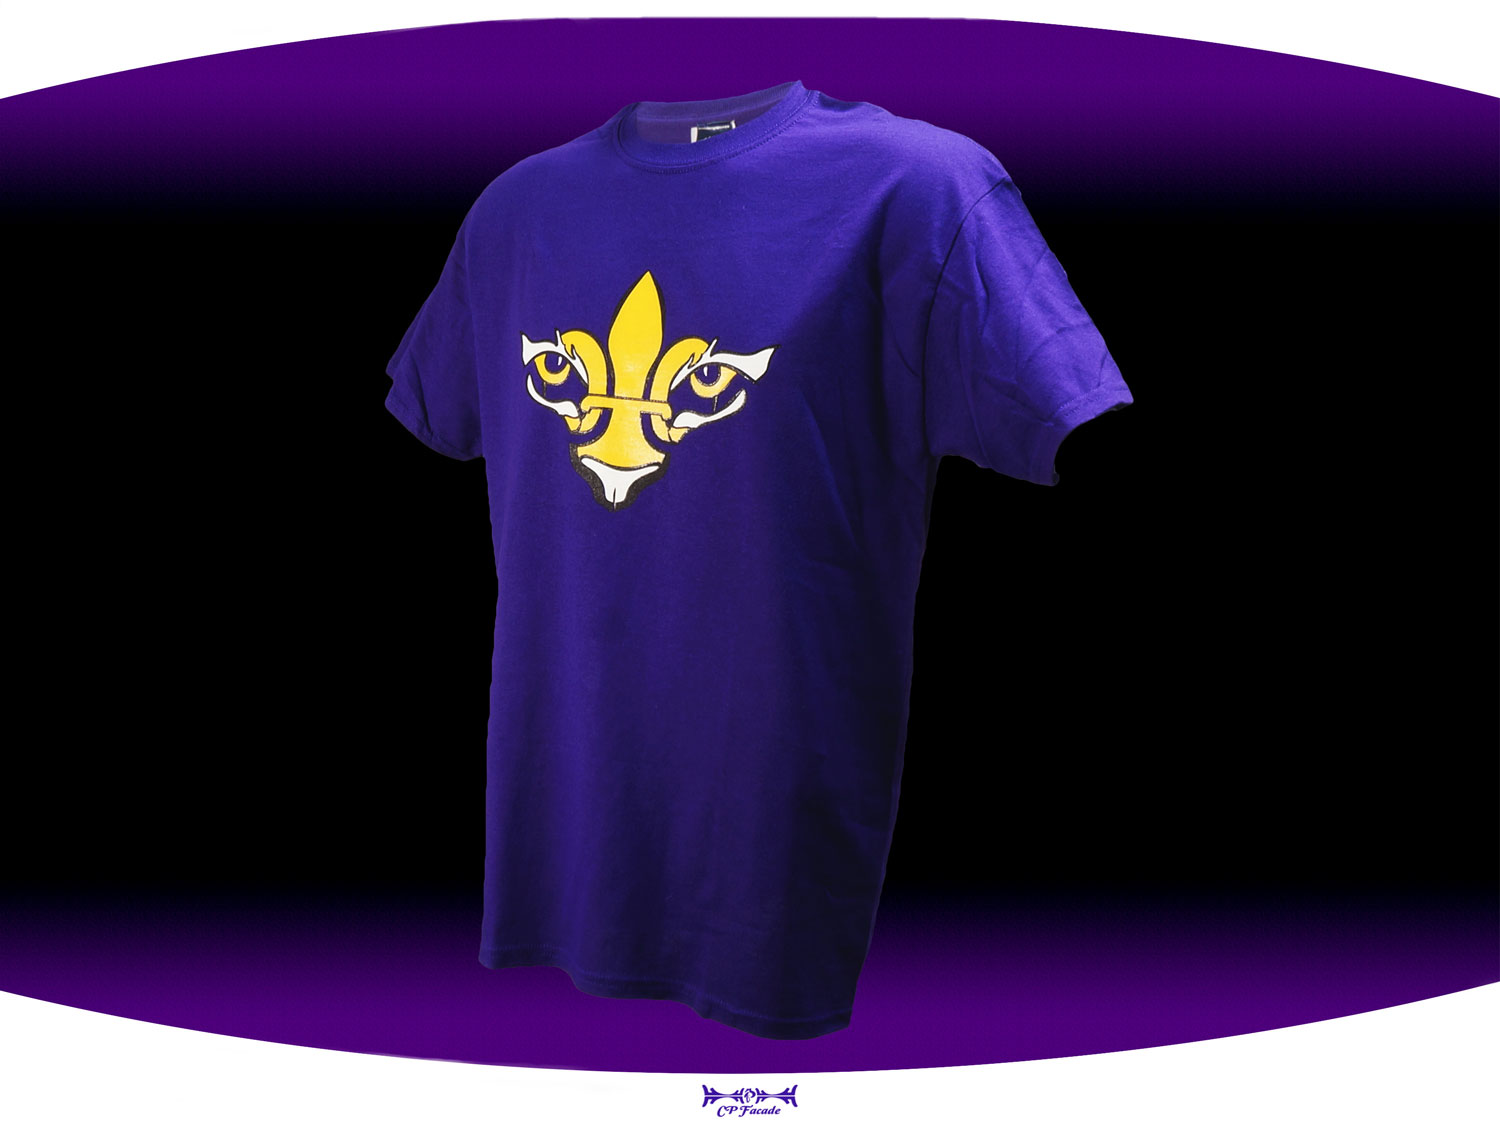 Purple screenprinted LSU t-shirt with a gold and white fleur de lis with tiger eyes on the chest